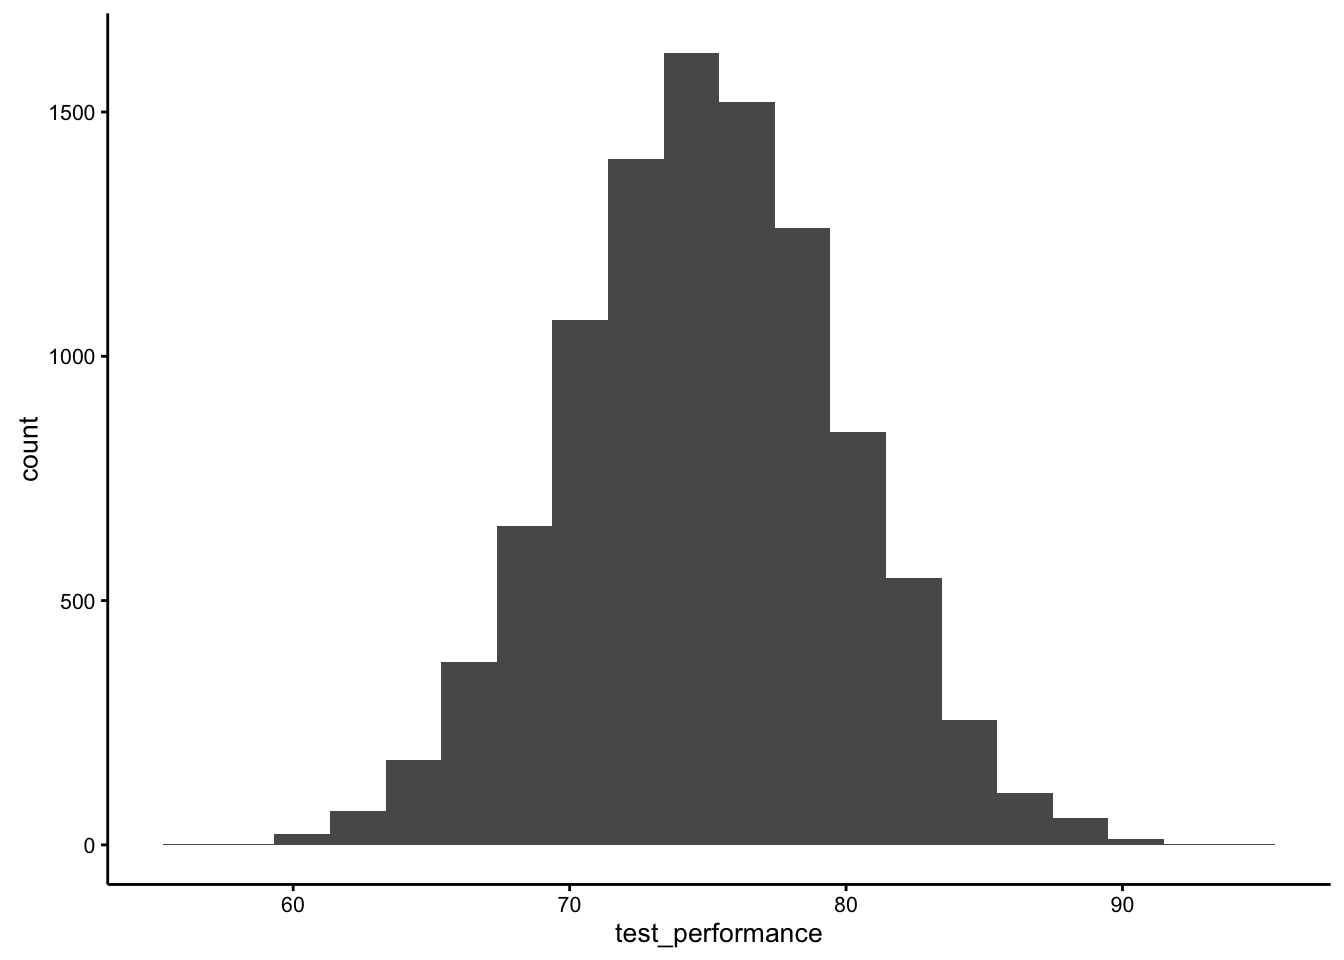 Sample test scores for both groups were randomly drawn from this distribution, with mean 75, and standard deviation 5.